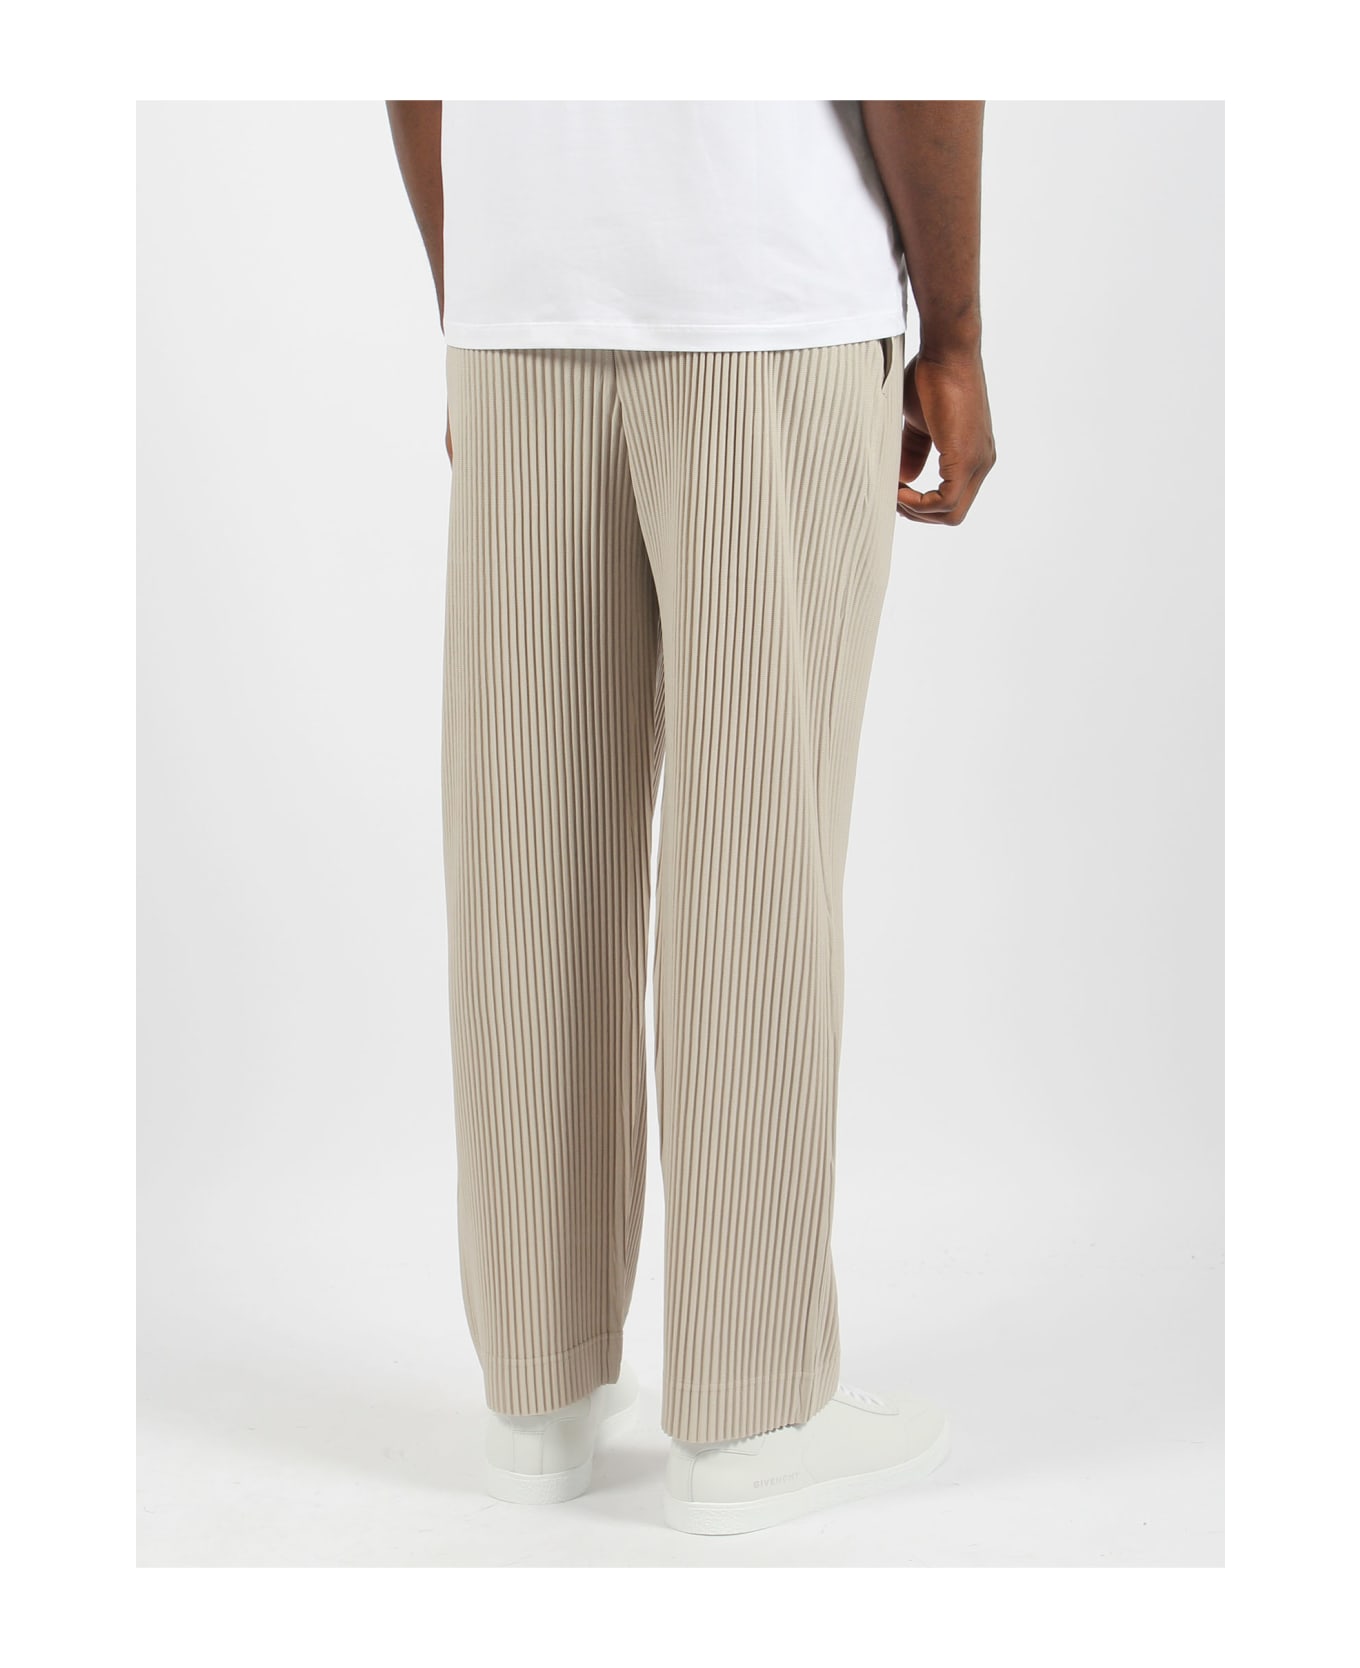 Homme Plissé Issey Miyake Mc March Trousers - Beige